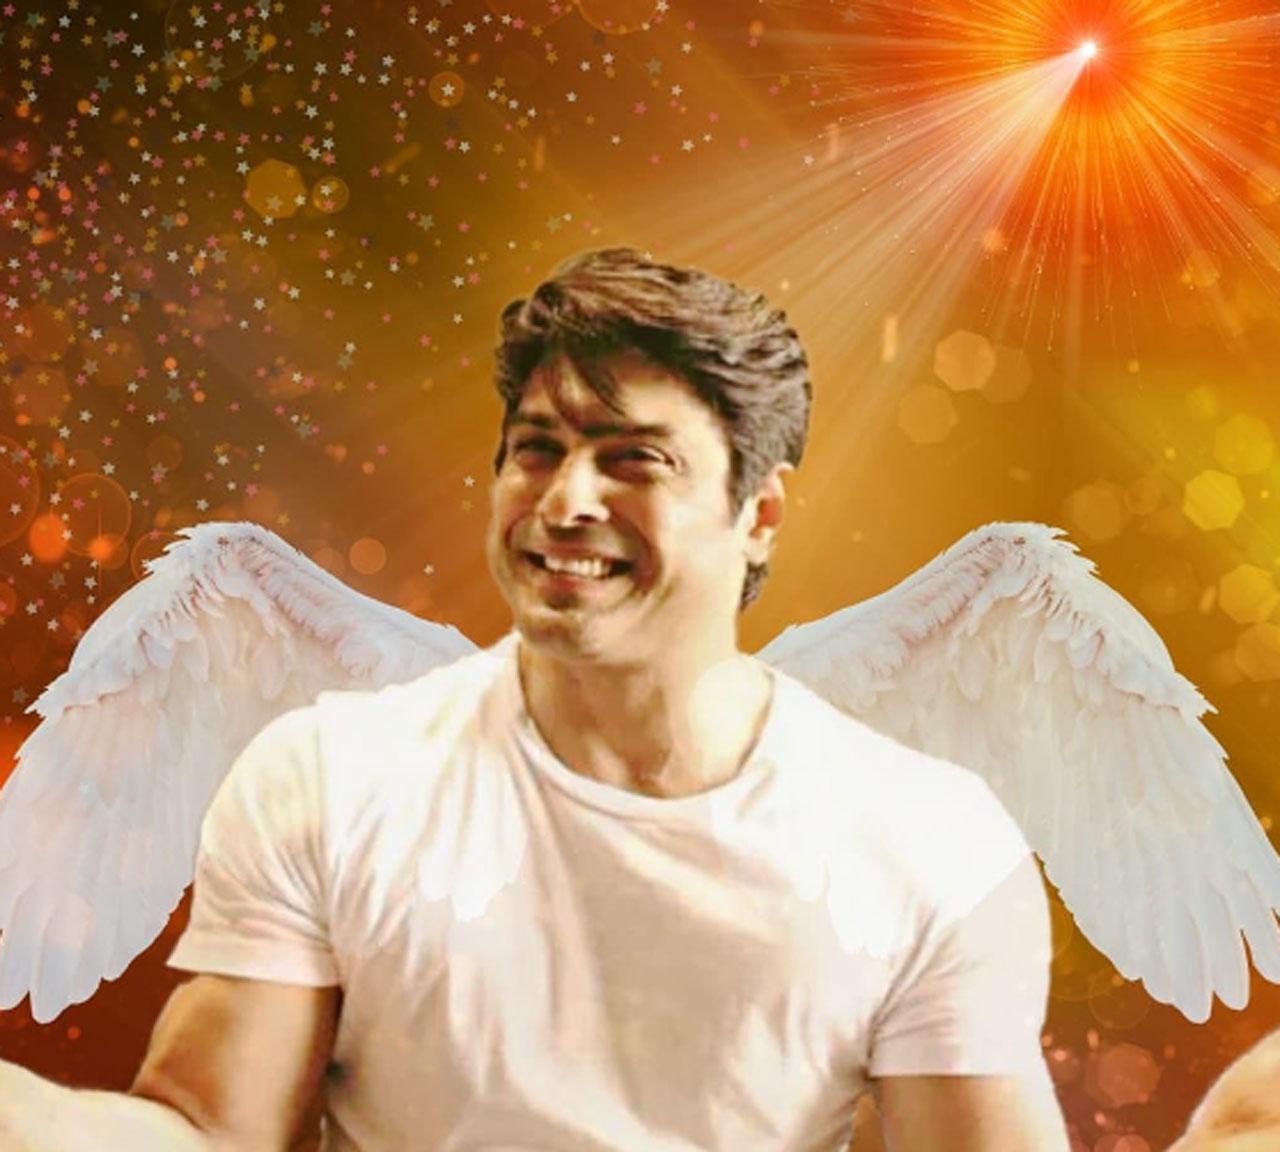 This picture shared by Shehnaaz Gill was heartbreaking, she wants her friend Sidharth Shukla to come back and so do the fans. The actor was truly an angel